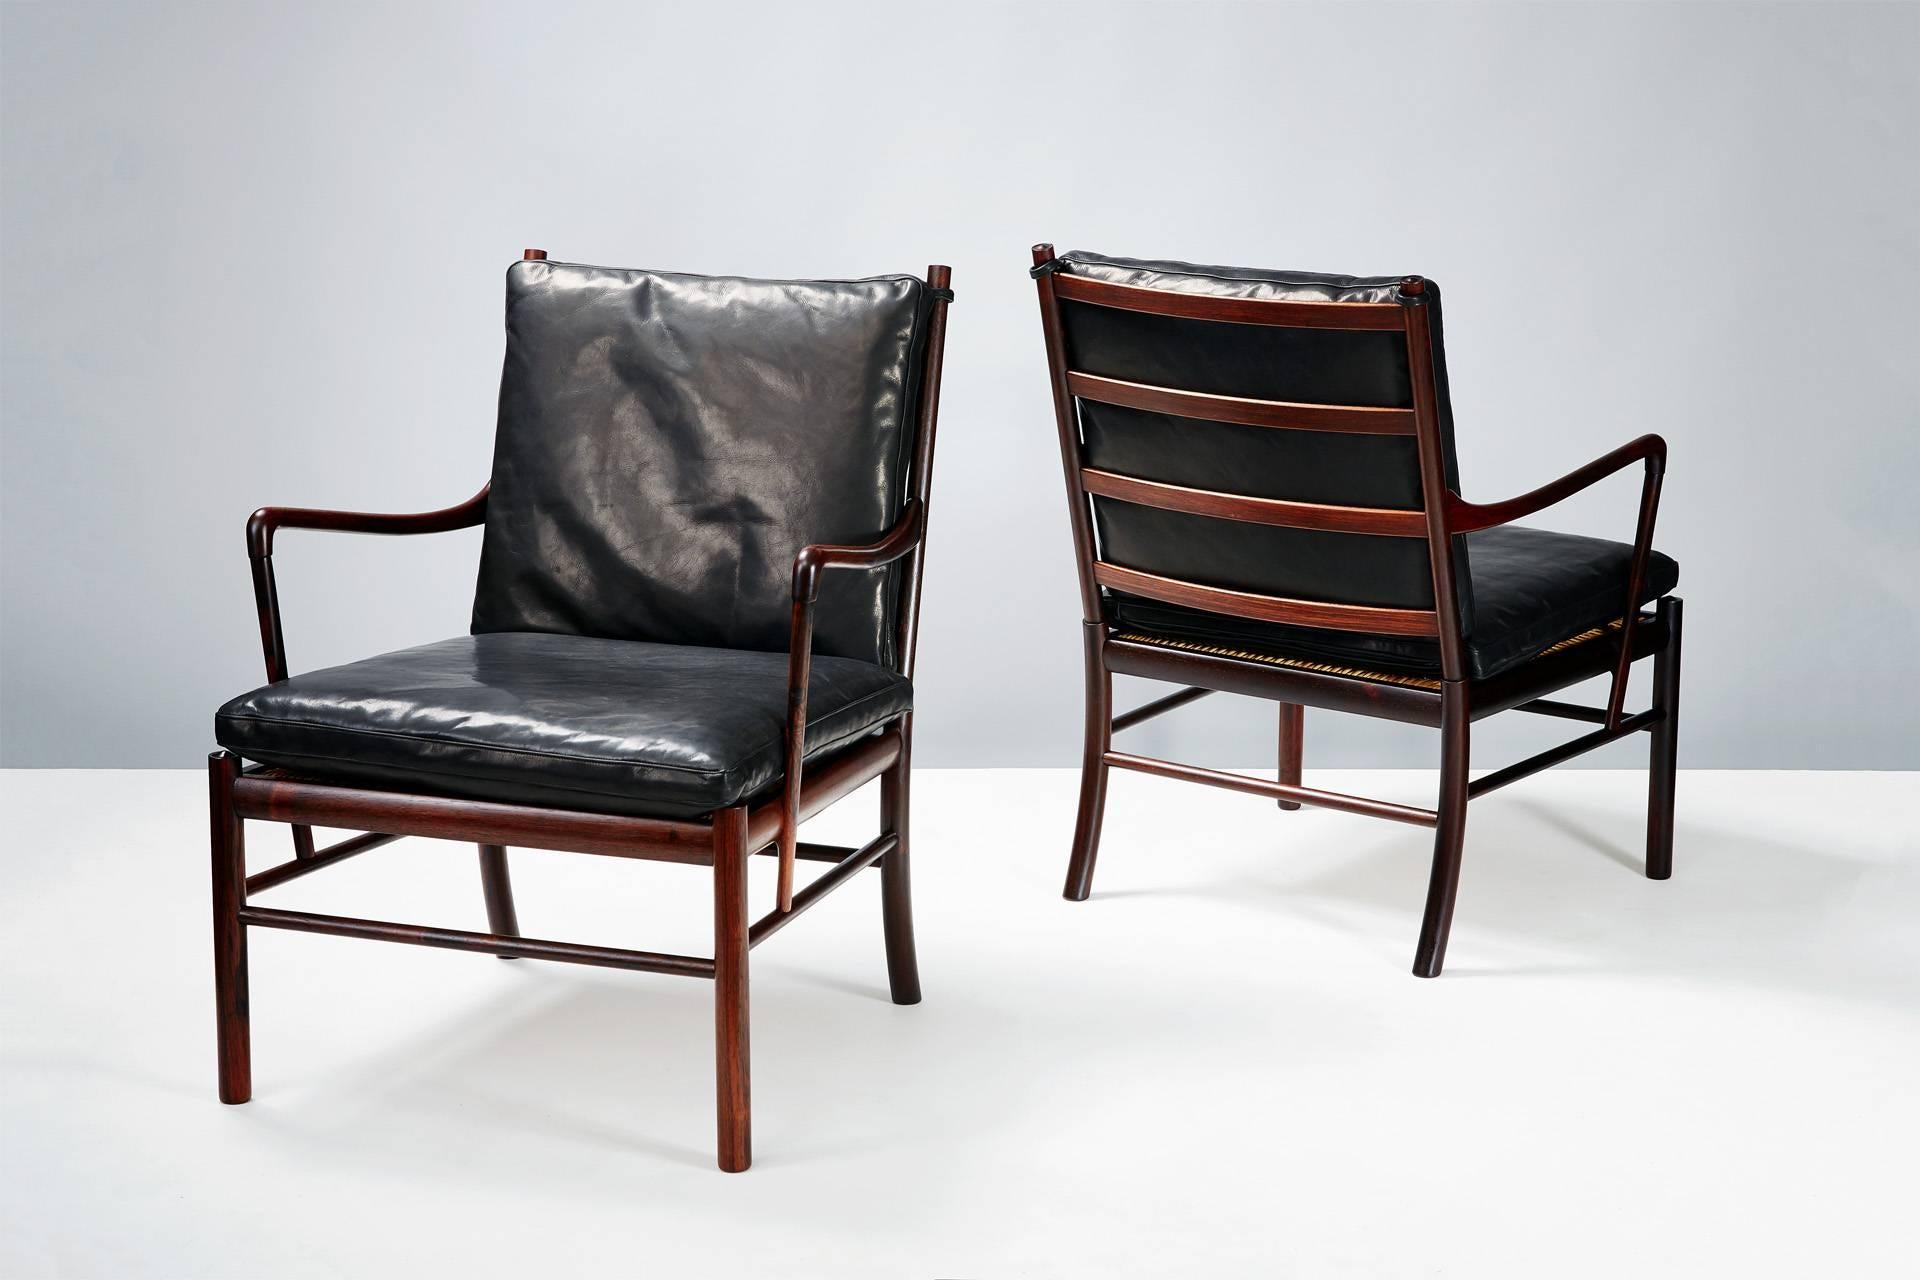 Solid Brazilian rosewood armchairs with woven cane seats. Produced by Poul Jeppesen, Denmark, circa 1960. Black aniline leather seat cushions.